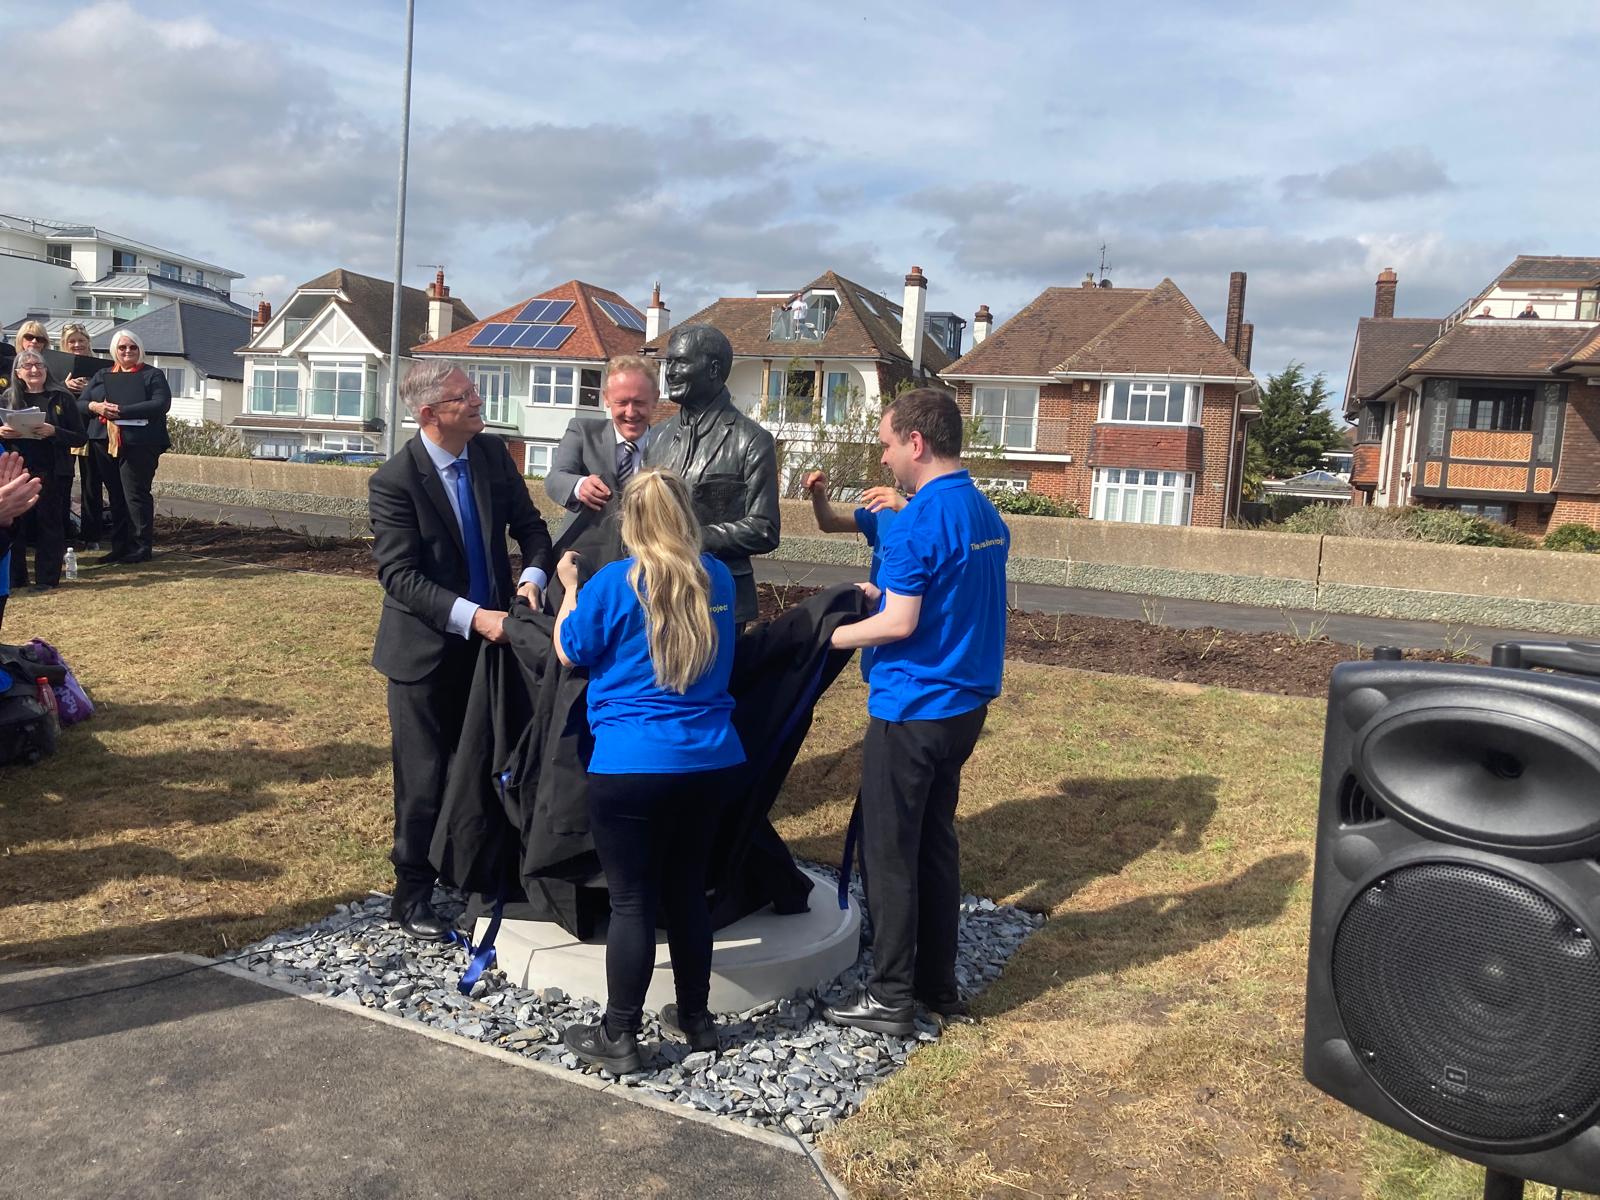 Murdered Catholic MP Sir David Amess honoured with seafront statue